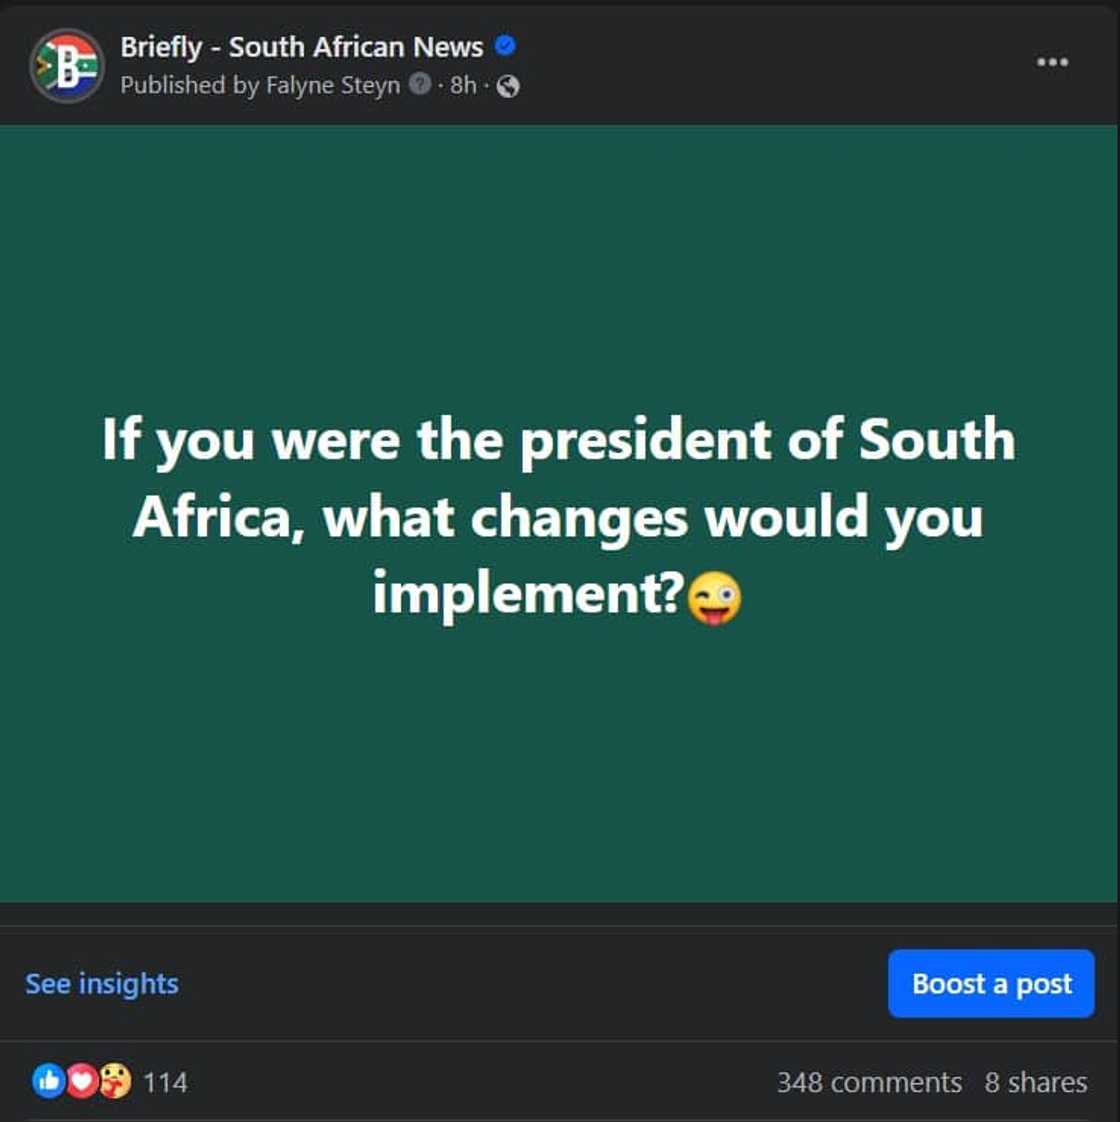 What would change if you were the president